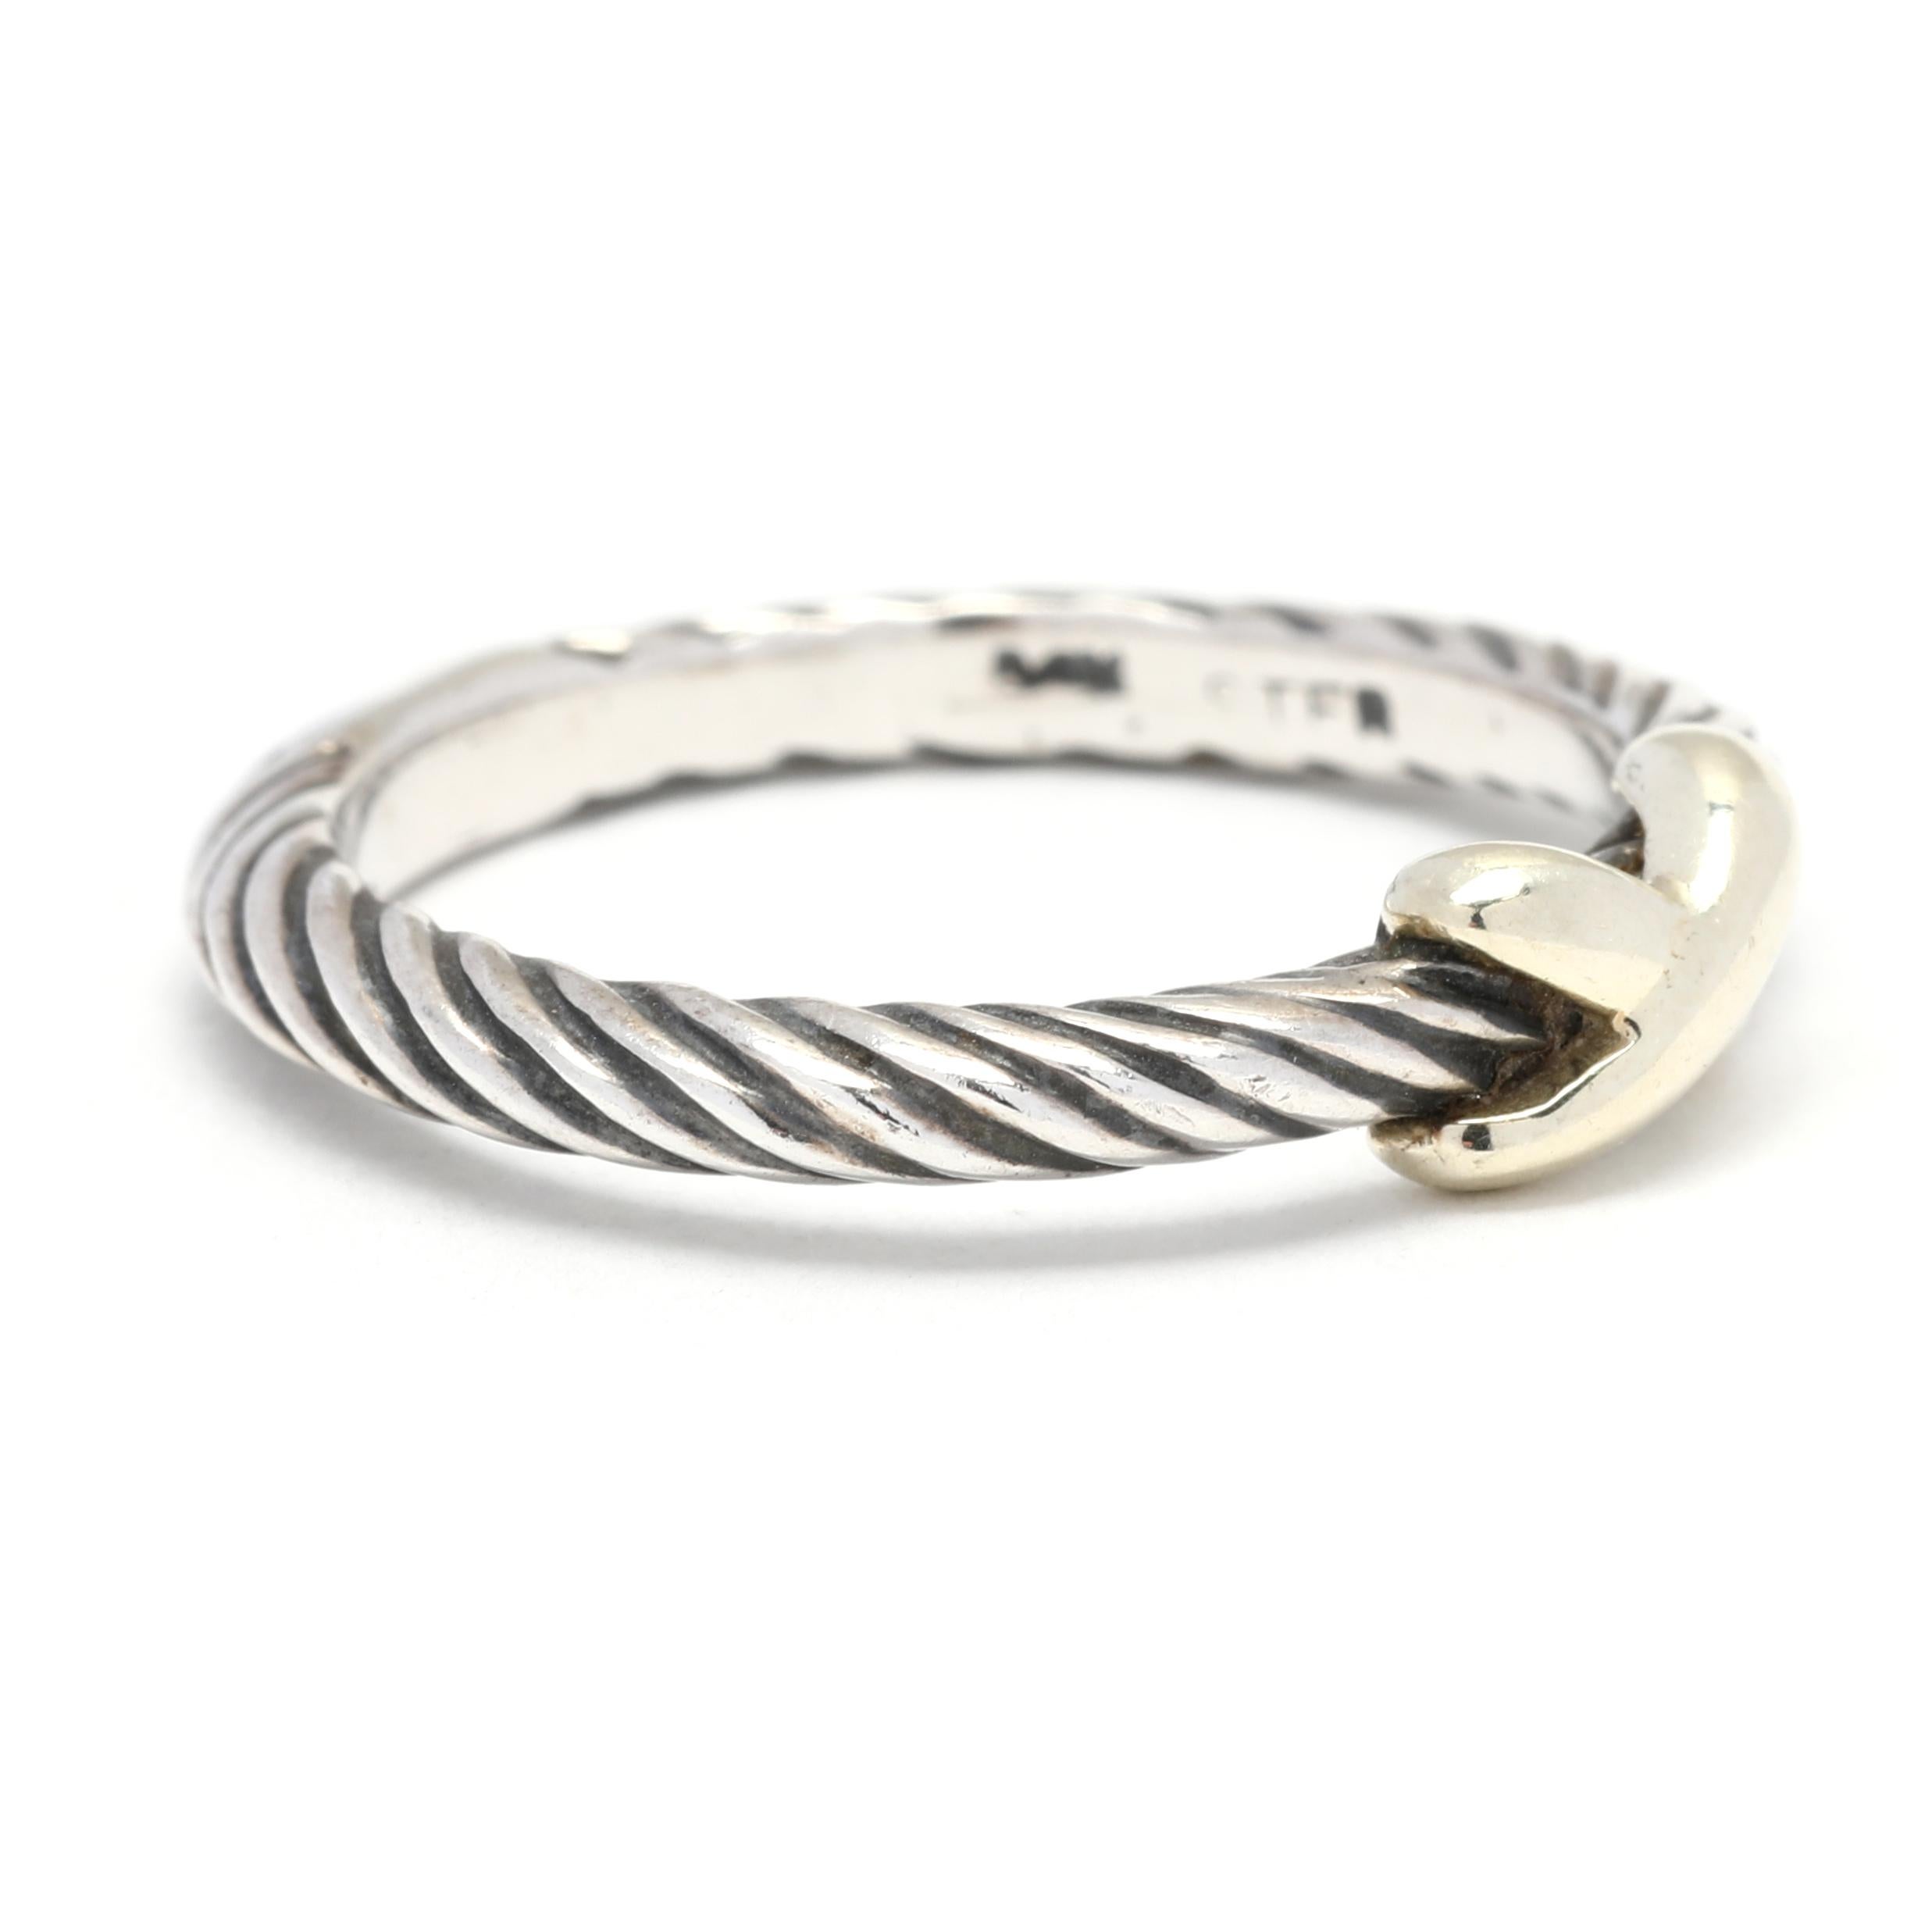 This modernly elegant David Yurman single X stackable band ring is on trend with a timeless luxury feel that you won't want to take off. Handcrafted in 14K yellow gold and sterling silver, adorned with a delicate thin cable band and weighing 6